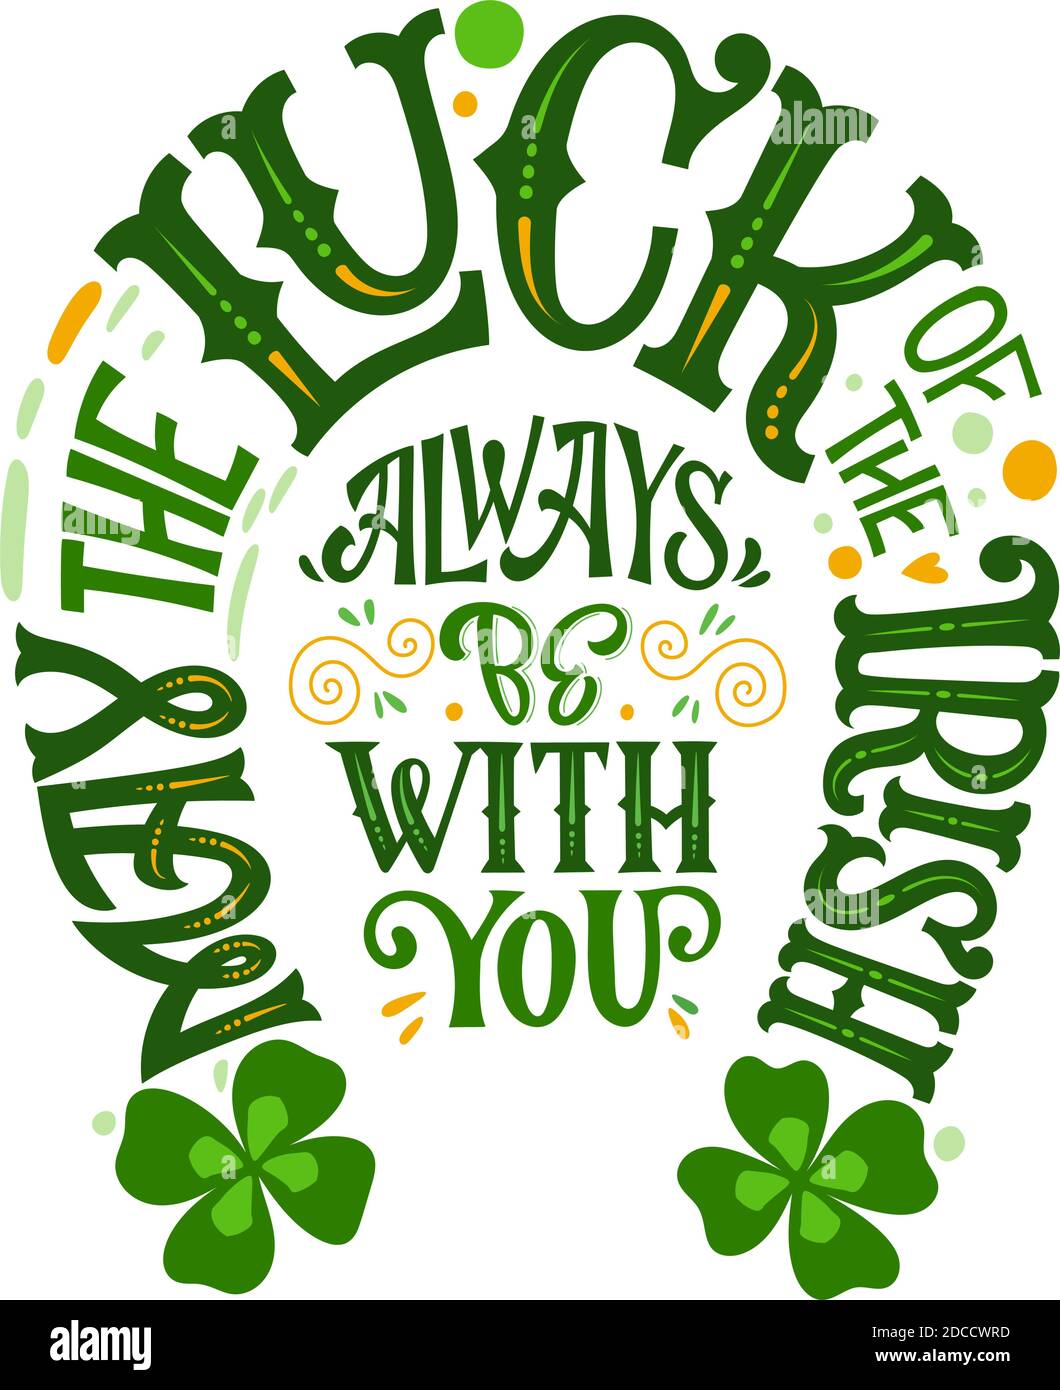 https://c8.alamy.com/comp/2DCCWRD/may-the-luck-of-the-irish-always-be-with-you-hand-drawn-vector-st-patricks-day-lettering-phrase-horseshoes-shape-design-2DCCWRD.jpg